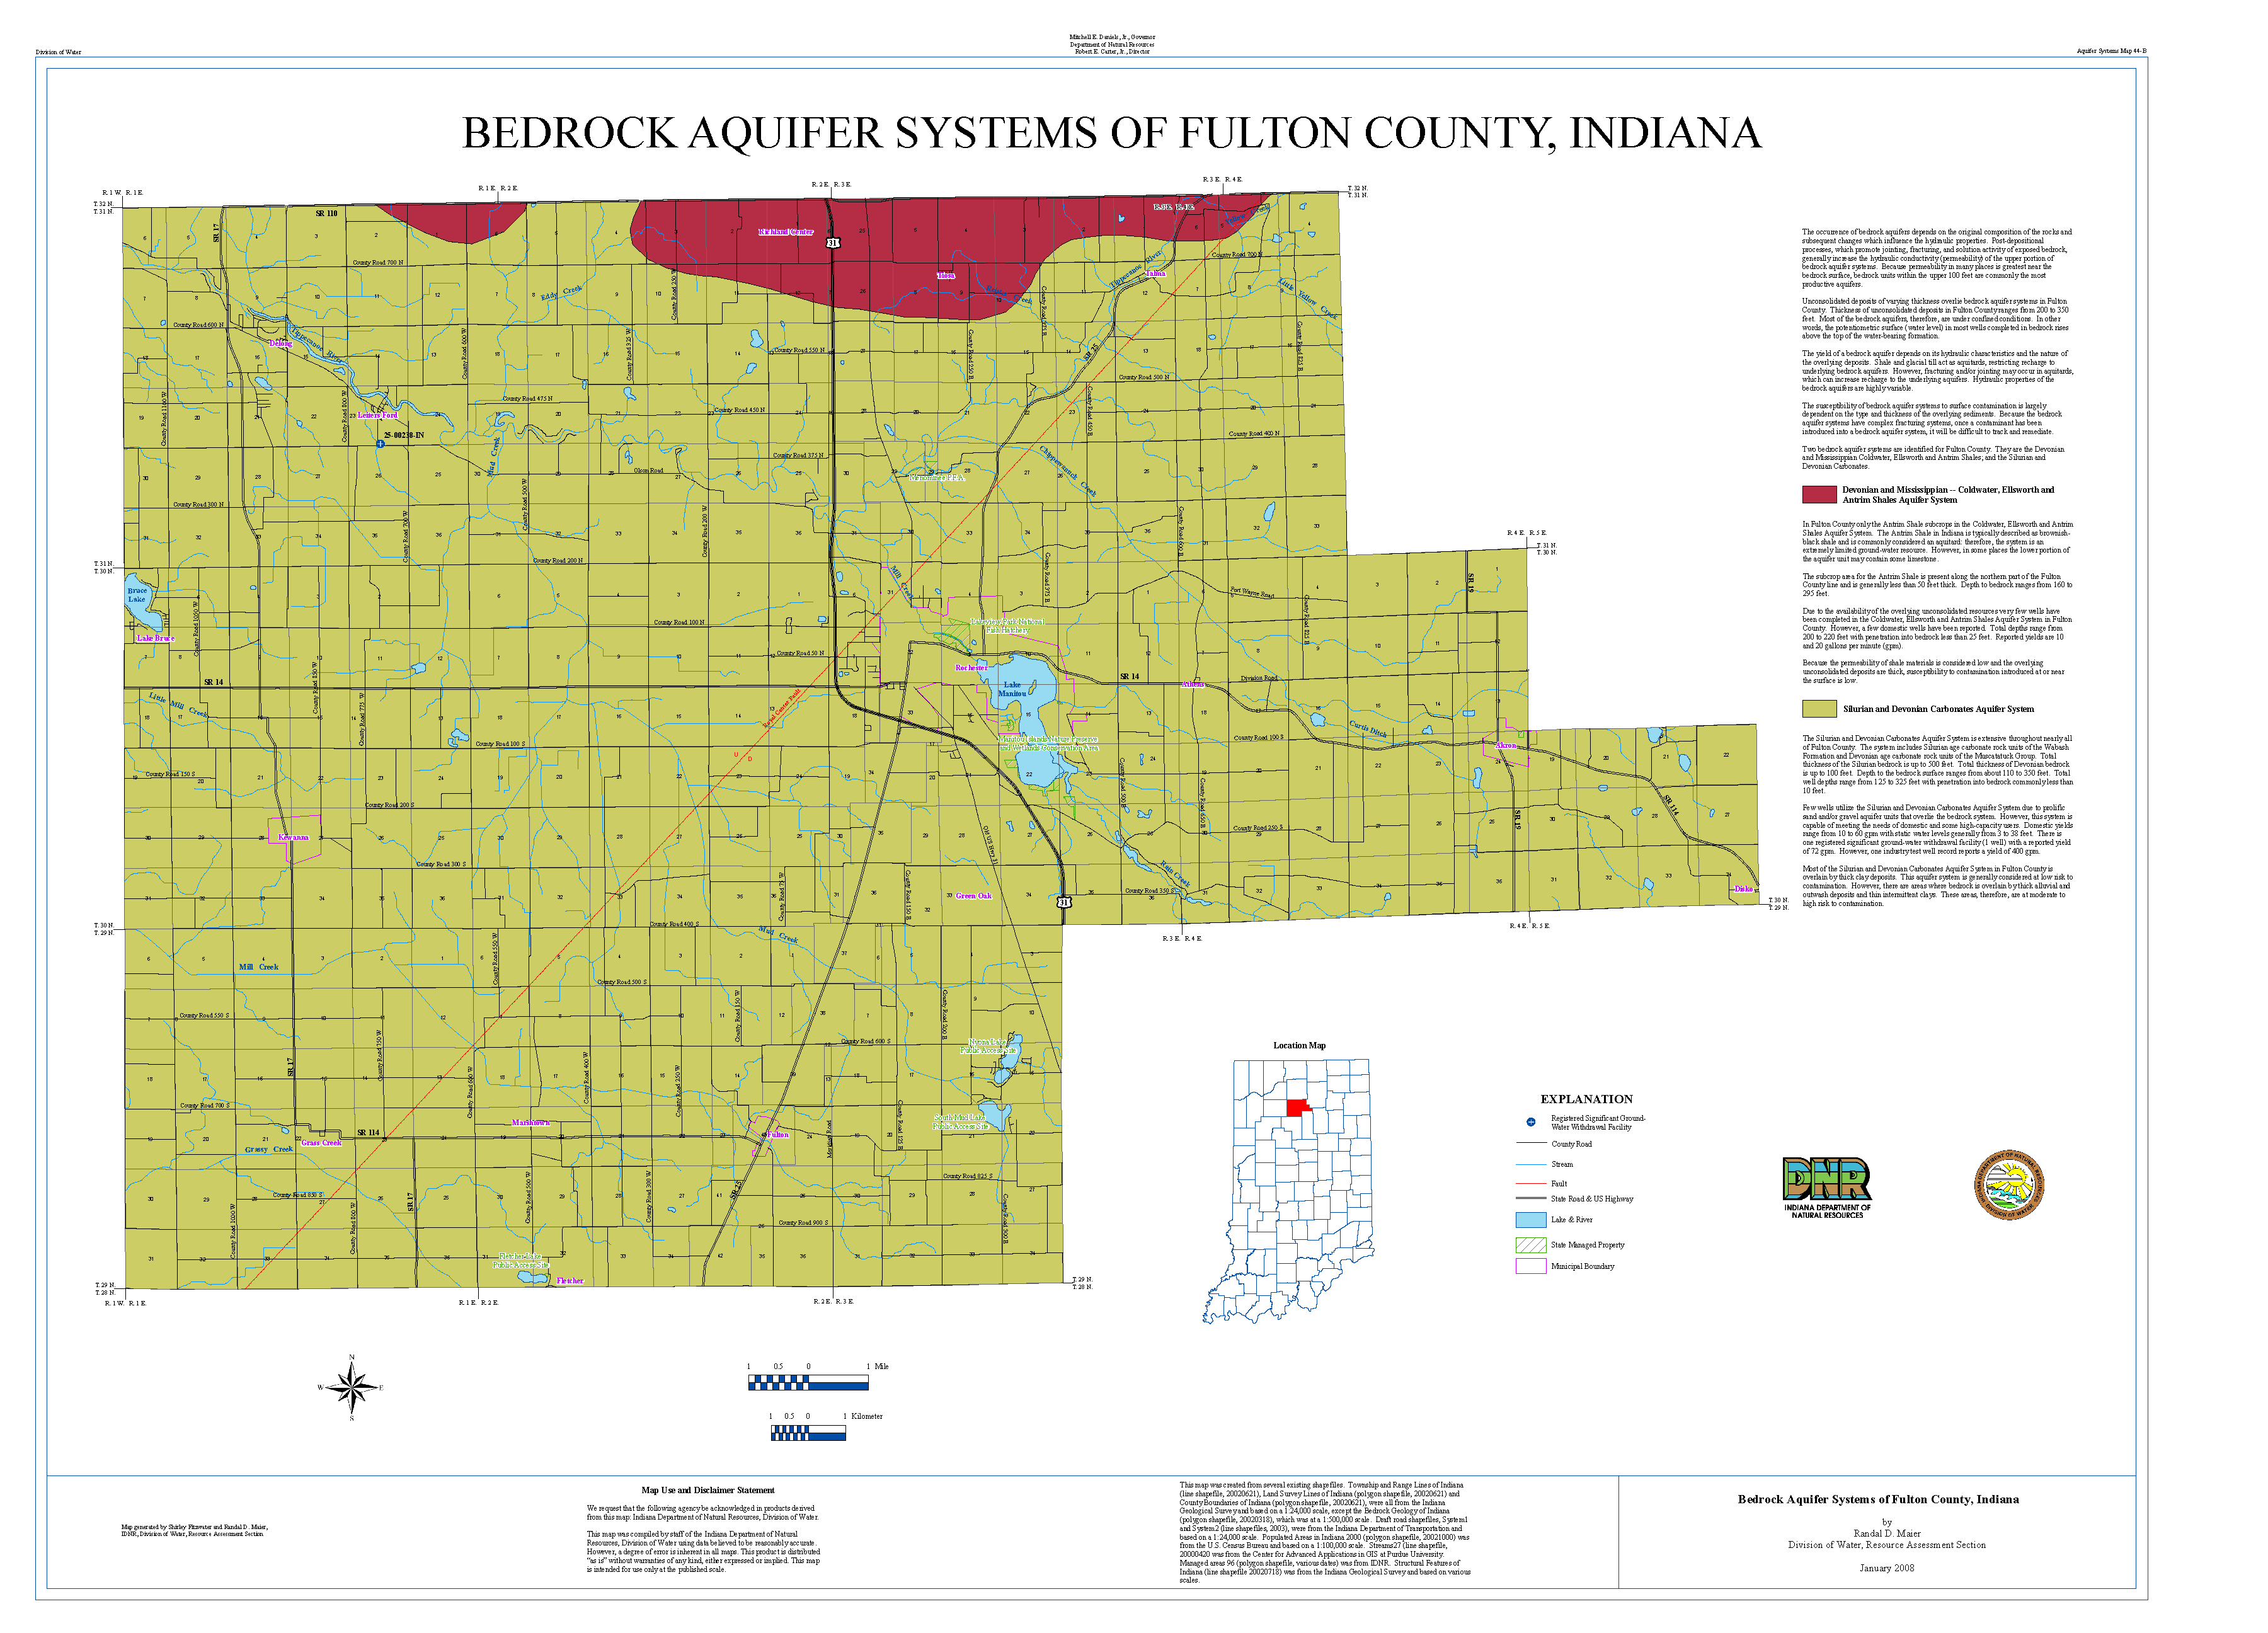 dnr-water-aquifer-systems-maps-44-a-and-44-b-unconsolidated-and